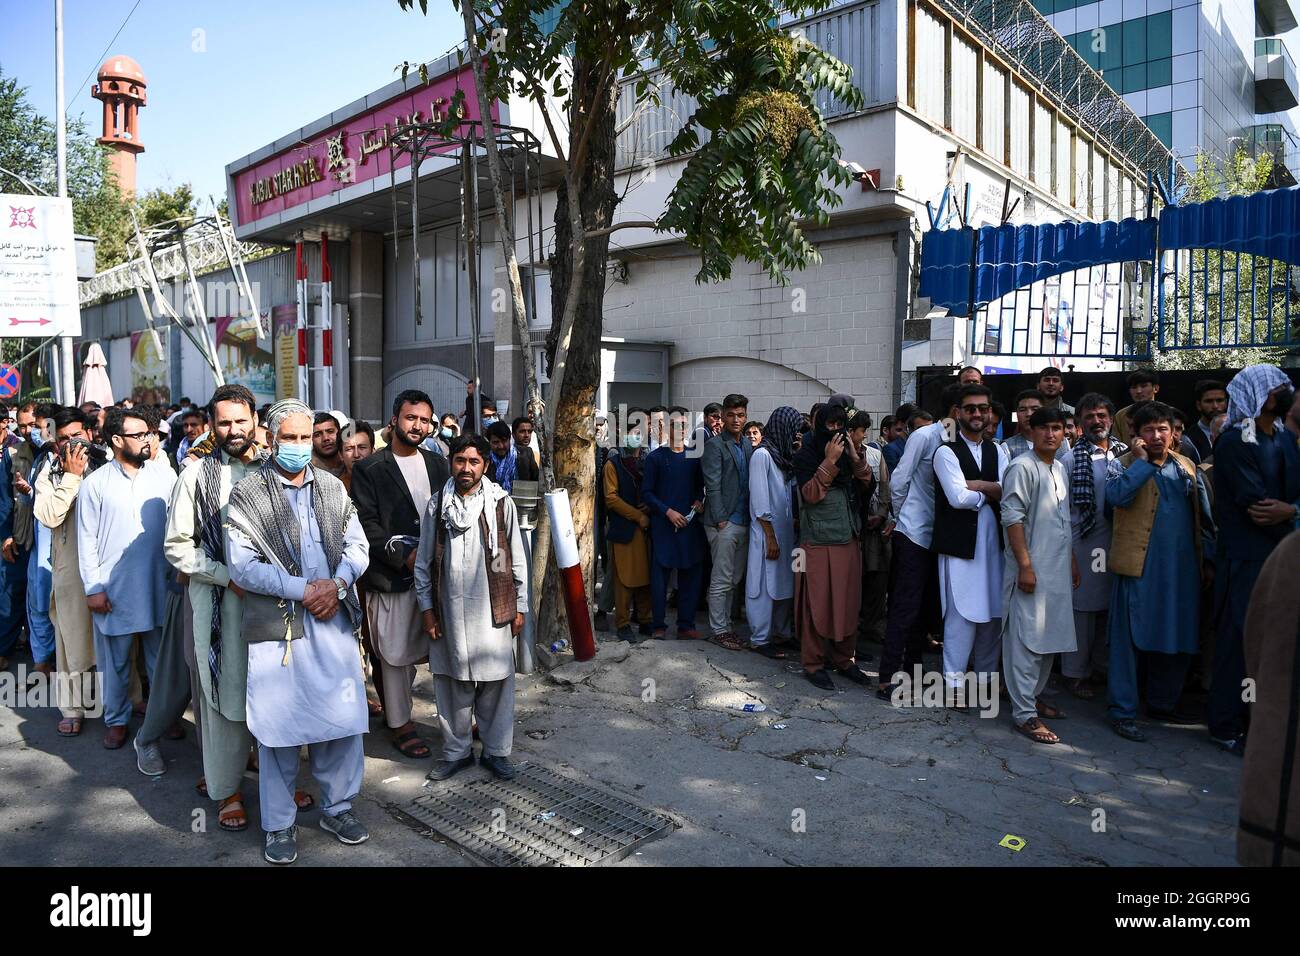 Long queues are forming in front of banks due to the lack of money supply in Kabul, Afghanistan, on September 01, 2021. The banks, which remained closed for about two weeks after the Taliban came to power in Kabul, cannot meet the population’s need for cash. Photo by Selcuk Samiloglu/DVM/ABACAPRESS.COM Stock Photo